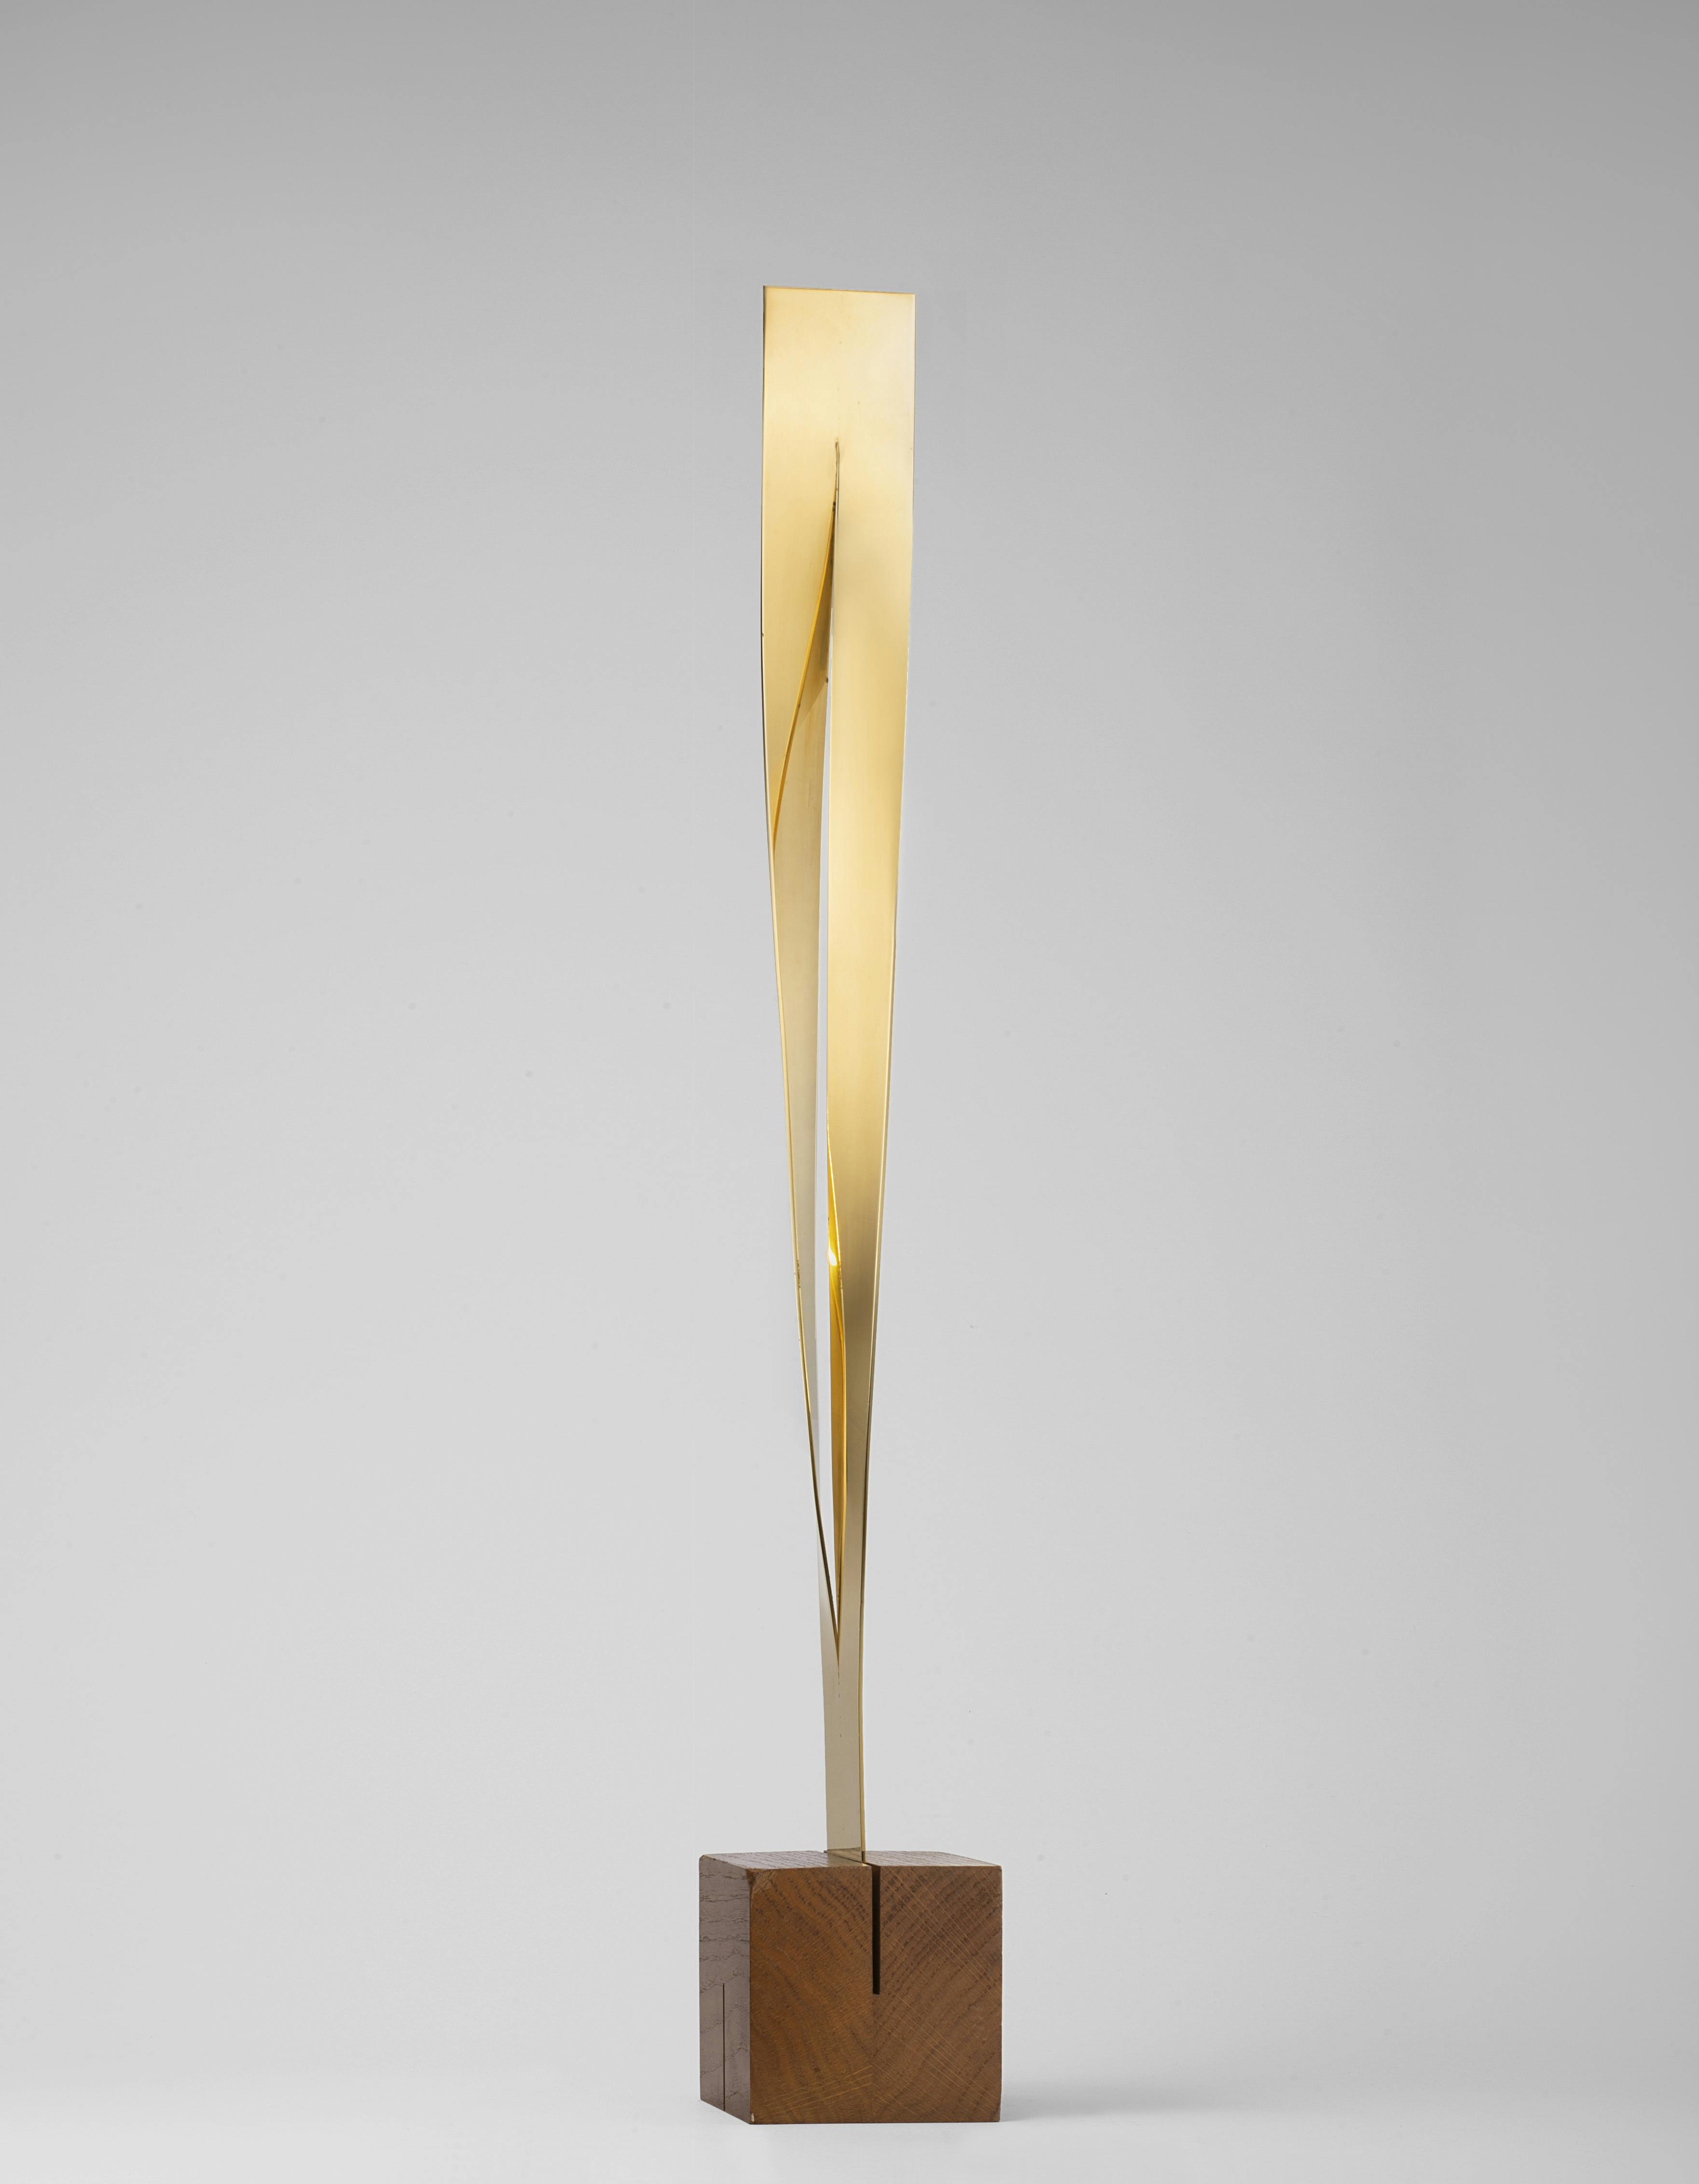 Photograph of a geometric, gold-colored sculpture by Max Bill.